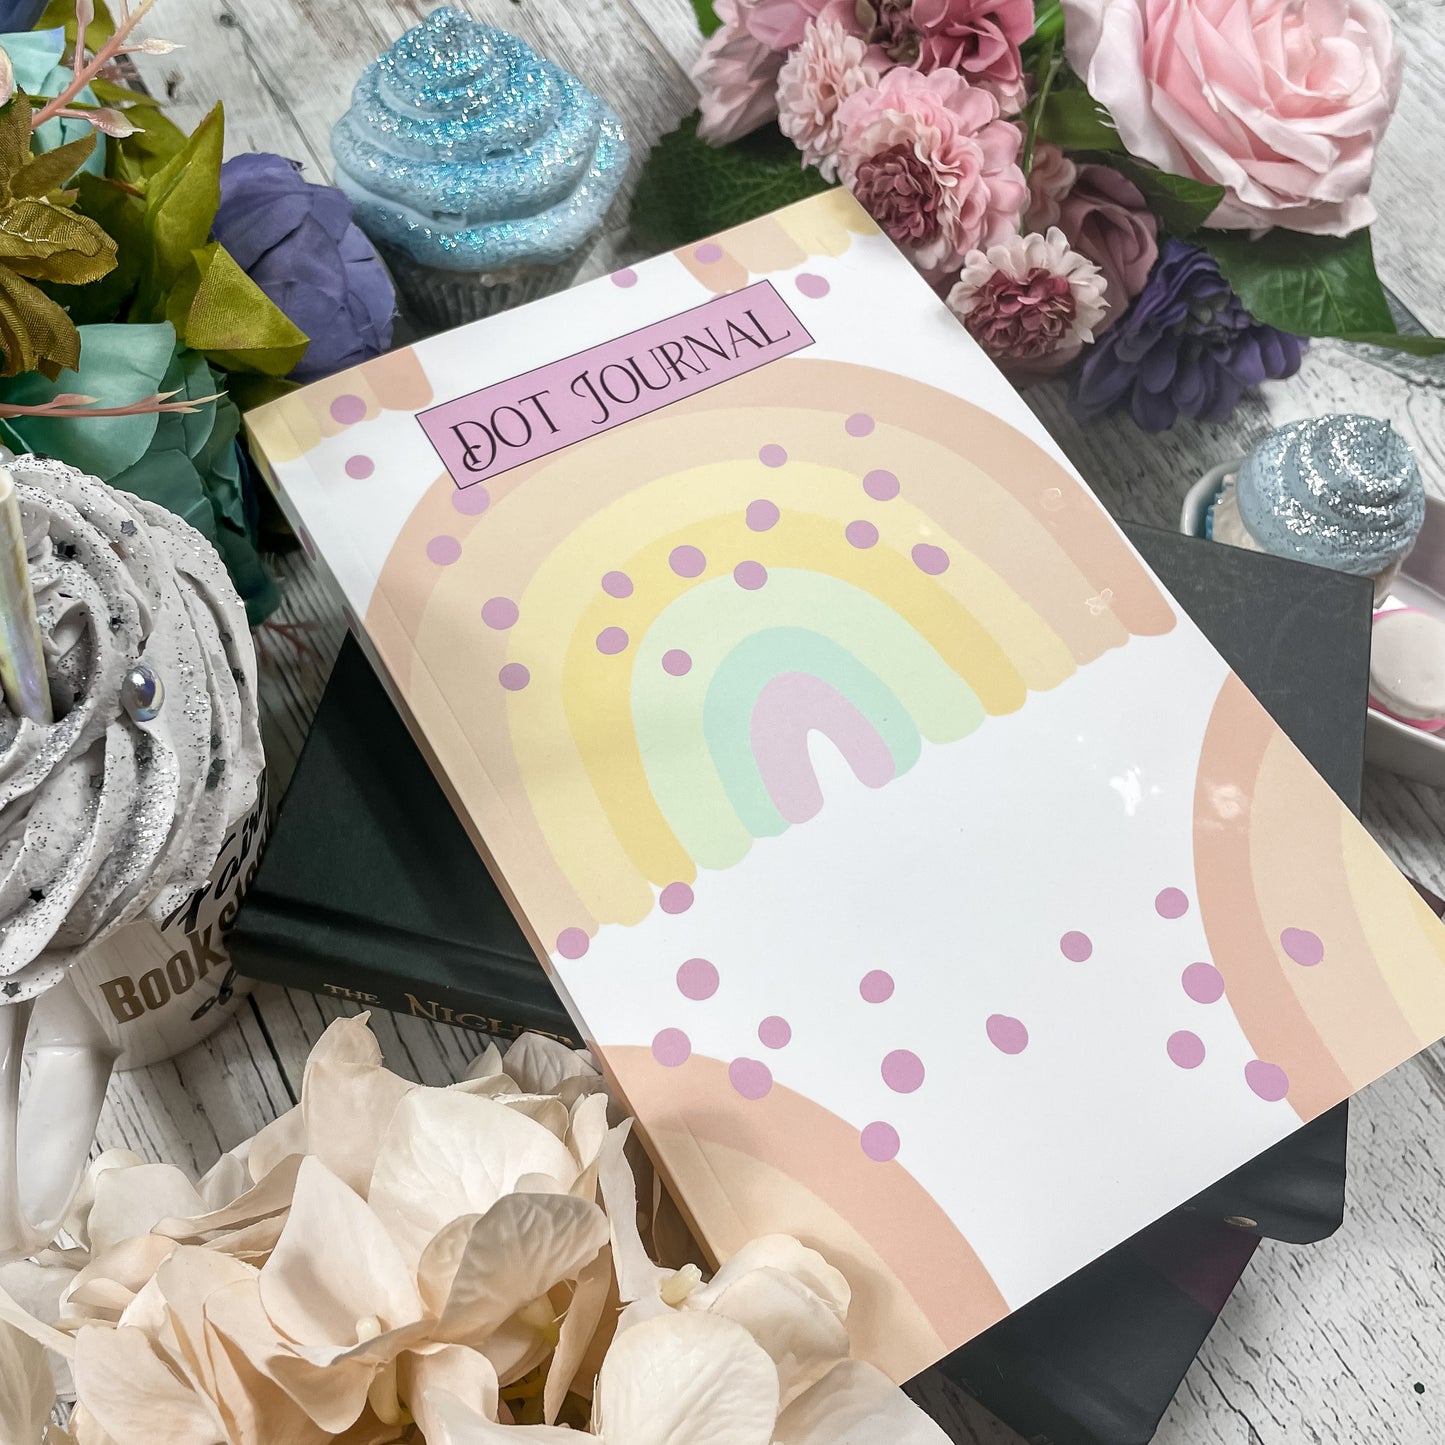 Dot Journal: Rainbow Dot Grid Journal for Writers, Doodlers, Bujo, 240 Pages, 6 in x 9 in